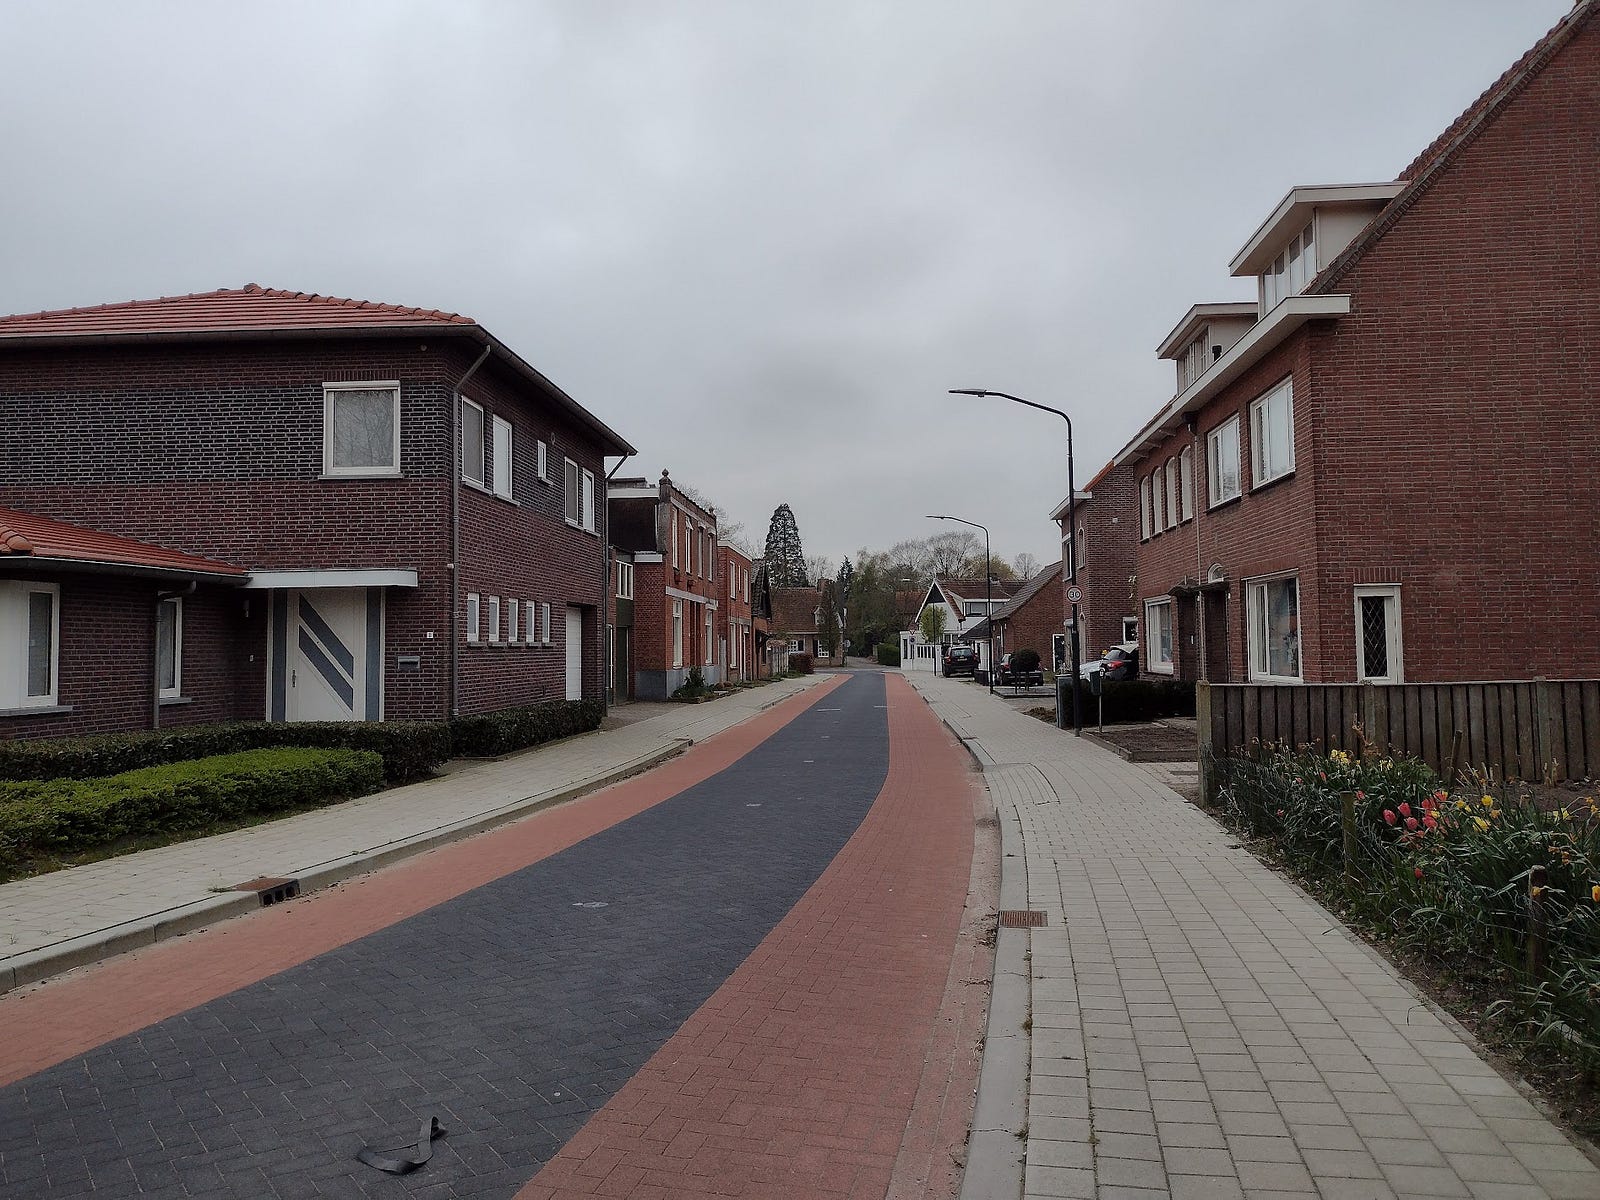 An ordinary residential street with red brick on the left and right edges